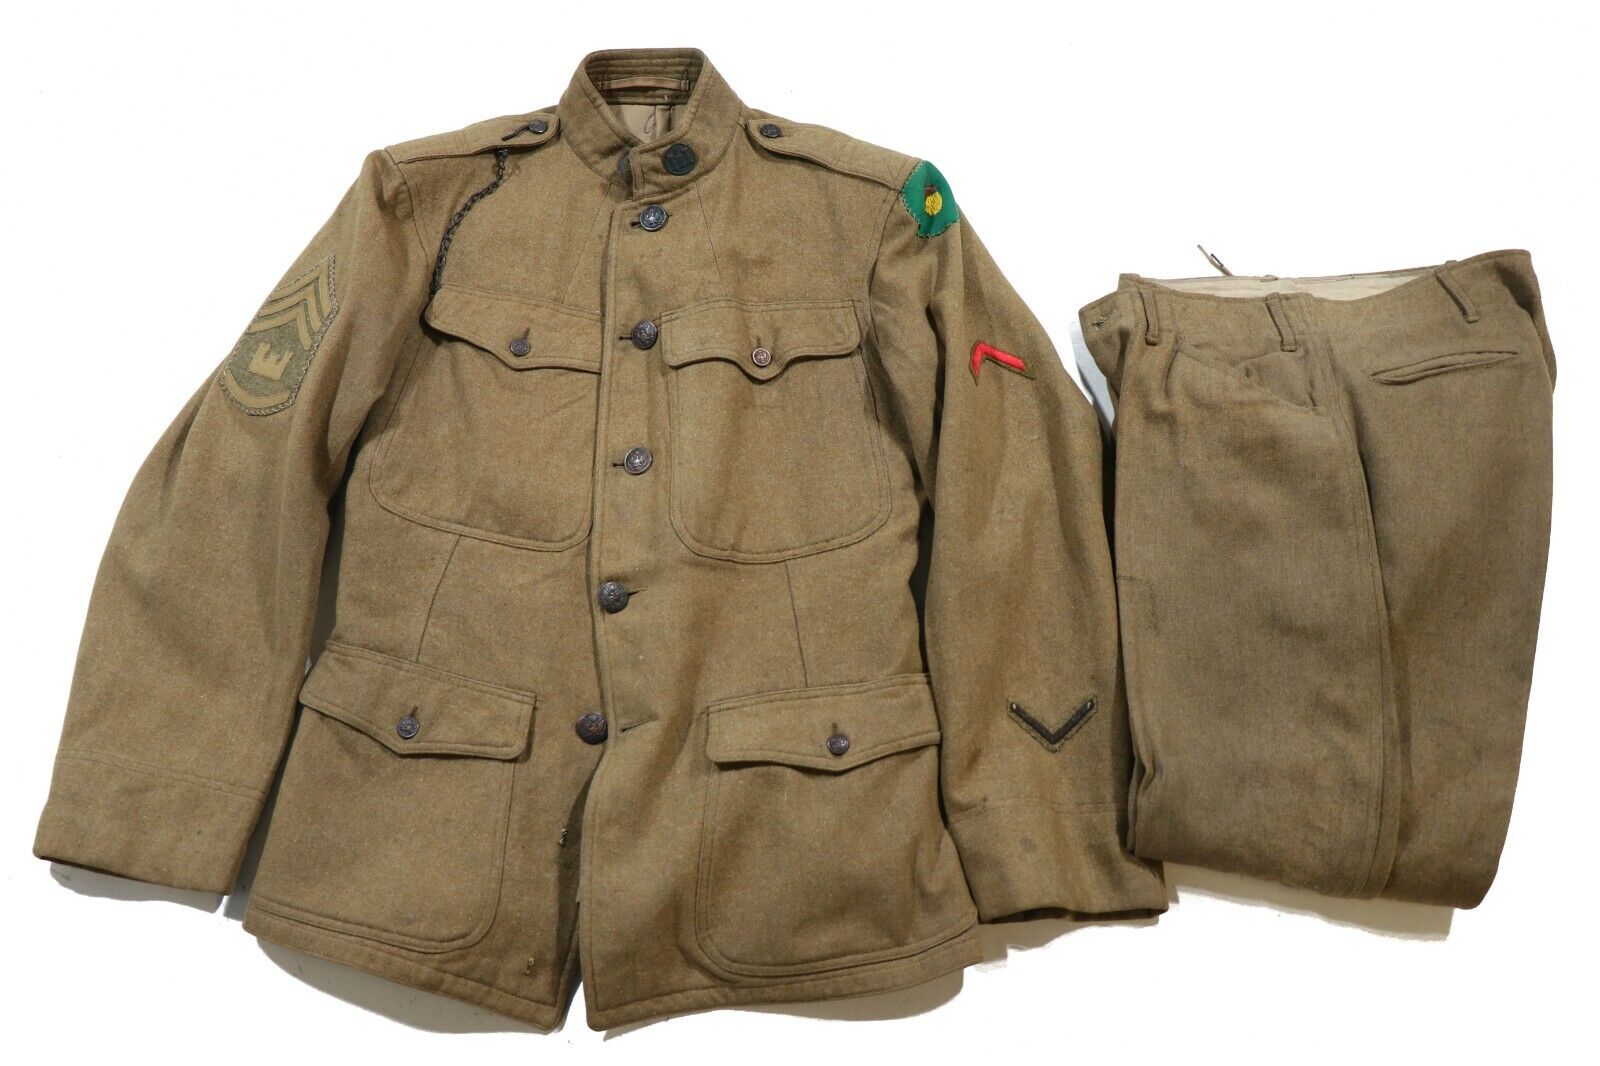 Original US WWI 87th Infantry Division Uniform Grouping WW1 Tunic & Pants